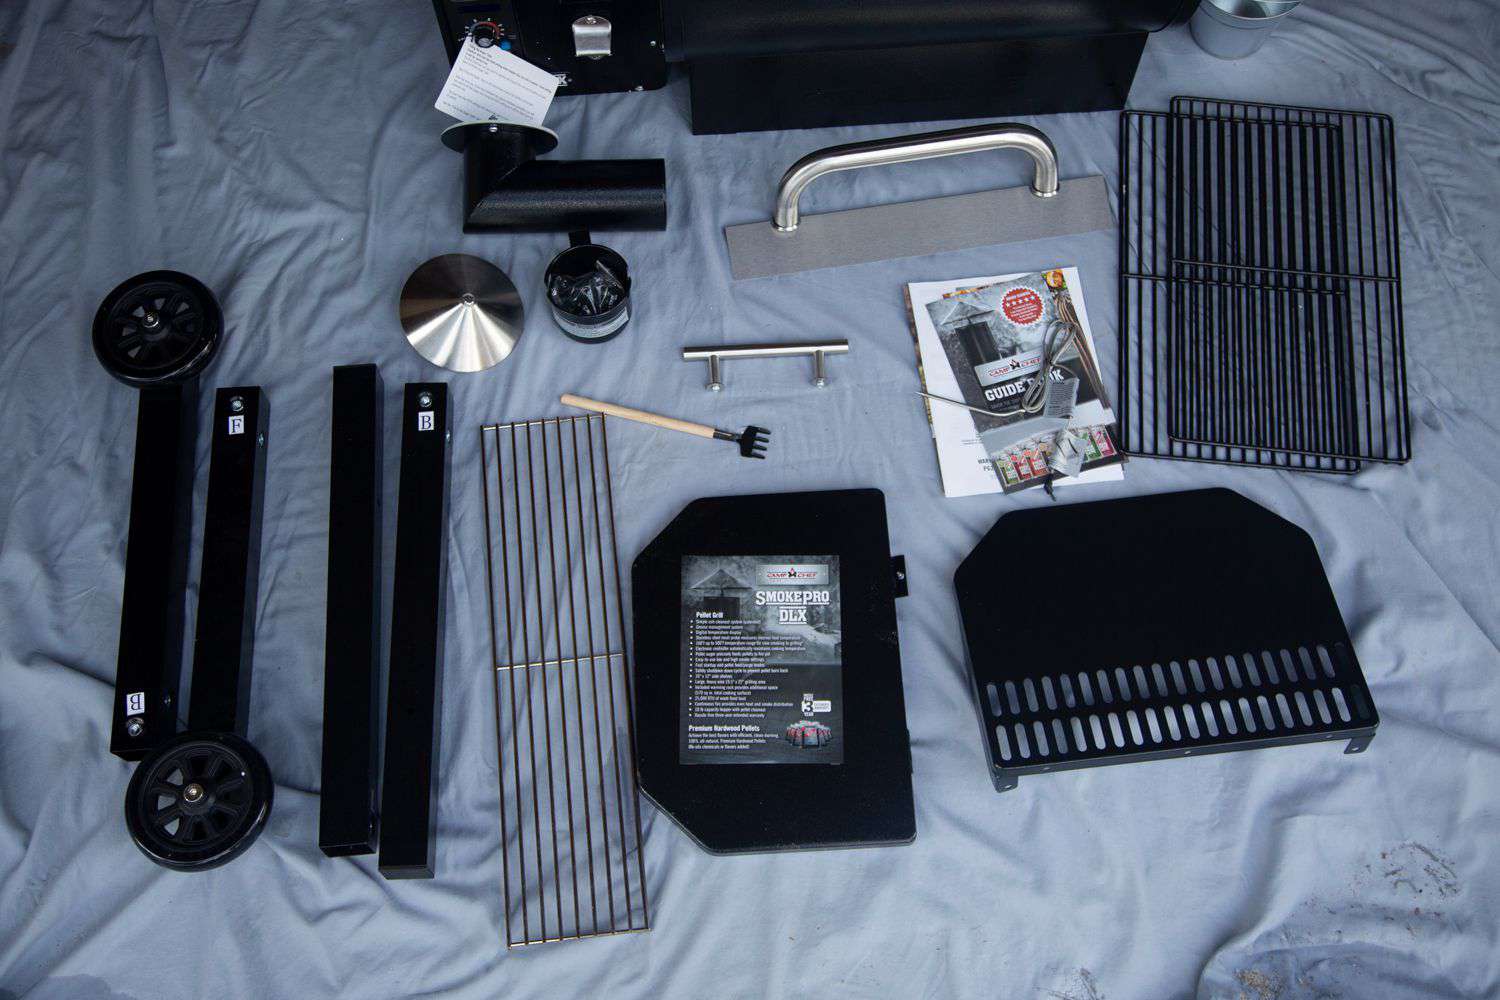 Parts of the Camp Chef SmokePro DLX Pellet Grill laid out on a sheet